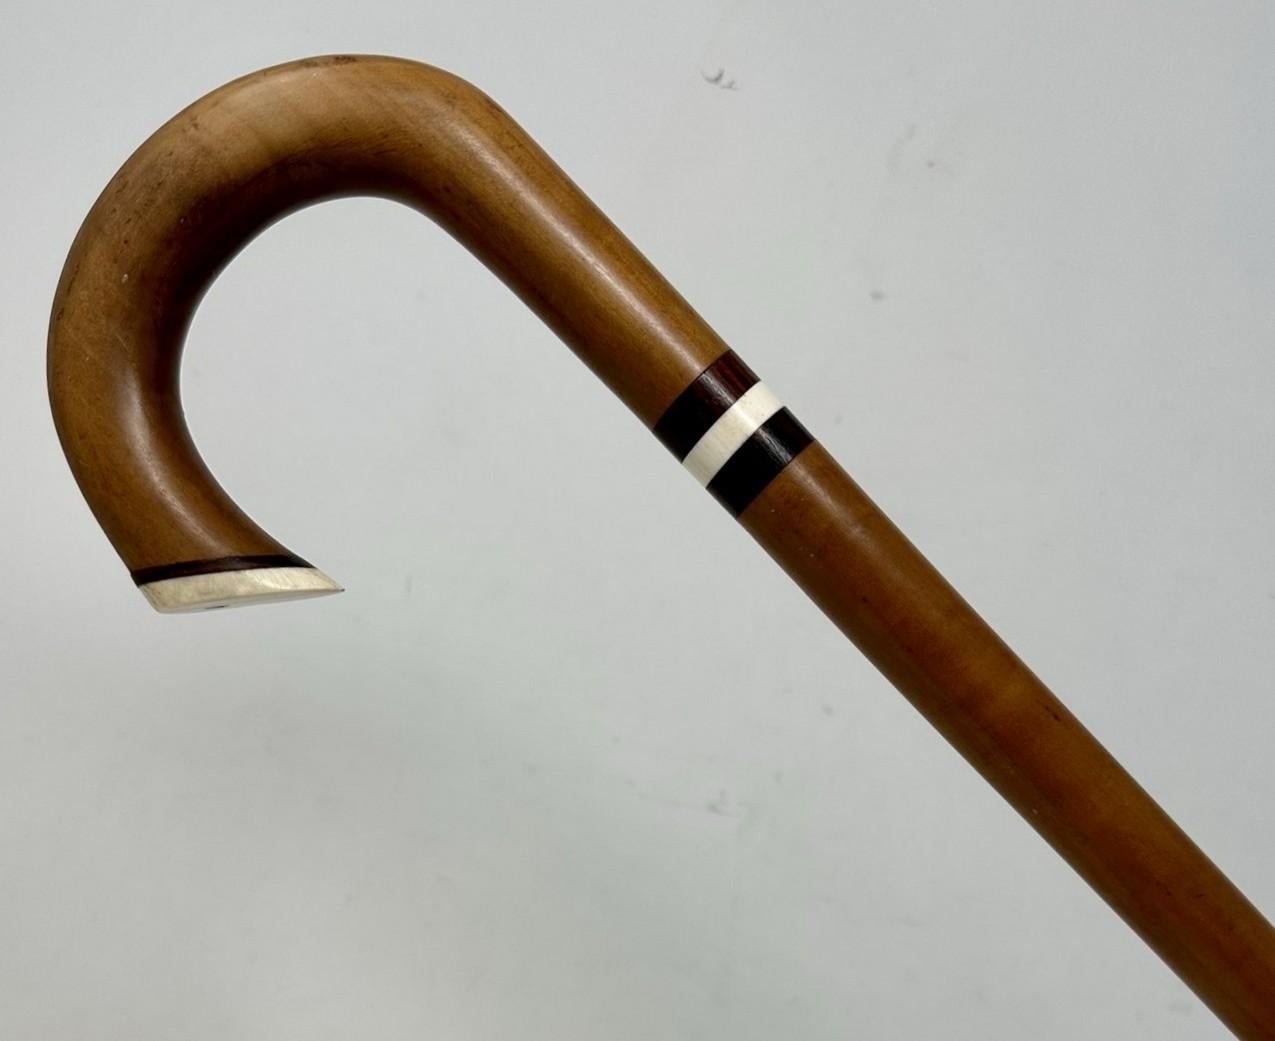 Stylish Well Grained Pale Malacca Wood Ladies or Gentleman's Walking Stick with Crook Handle and decorative rosewood and bone banding of English origin, first Quarter of the Twentieth Century.  

Condition: Good condition with nice patination,